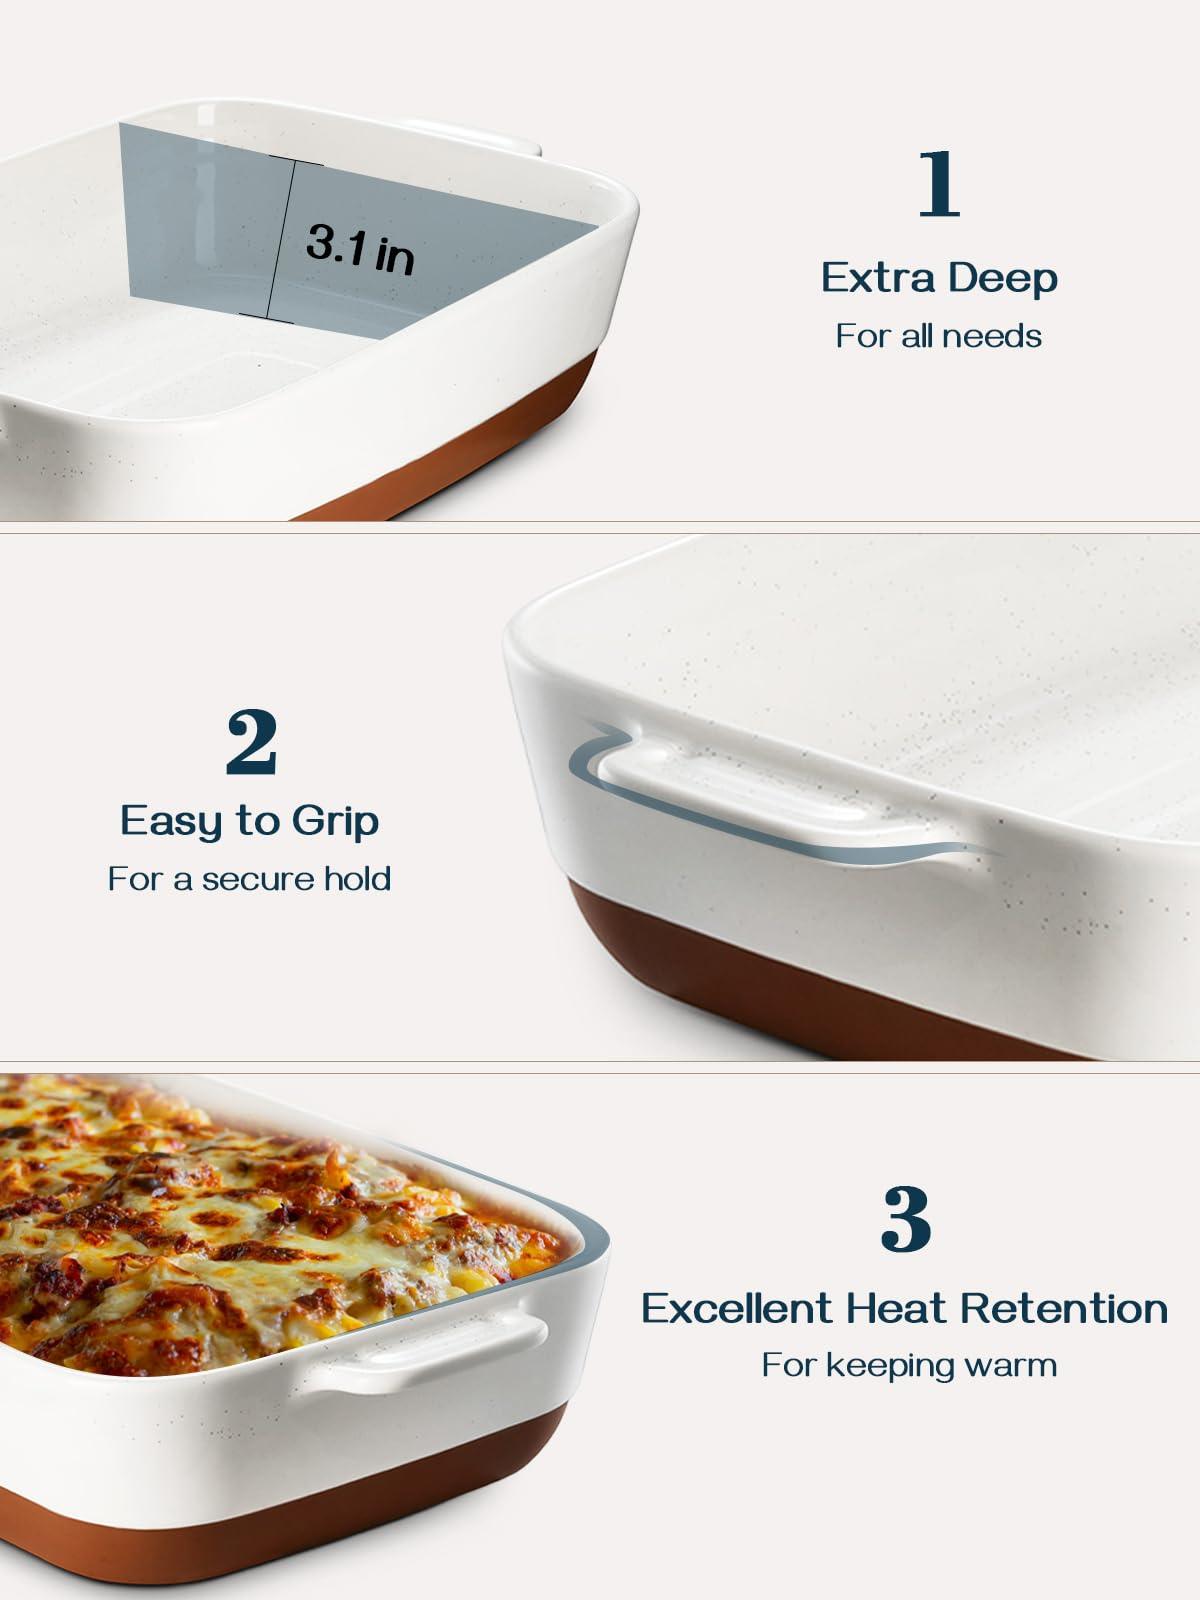 DOWAN Casserole Dish, 9x13 Ceramic Baking Dish, Large Lasagna Pan Deep for Oven, 140oz Baking Pan with Handles, Oven Safe and Durable Bakeware for Lasagna, Roasts, Glaze with Specks - CookCave